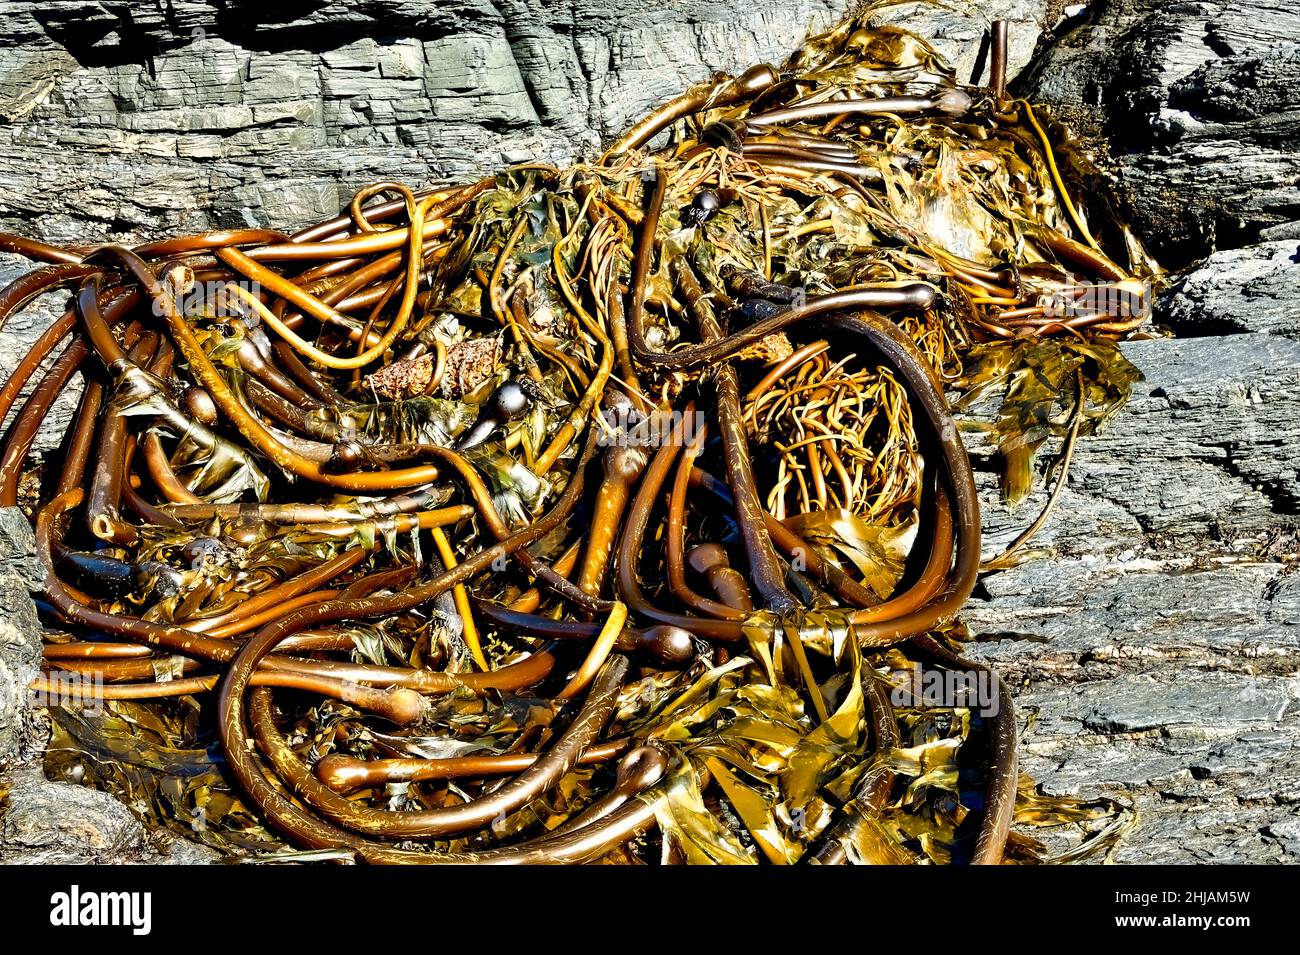 A pile of bull kelp (Nereocystis luetkeana) on a rocky beach on the west coast of Vancouver Island in British Columbia Canada Stock Photo